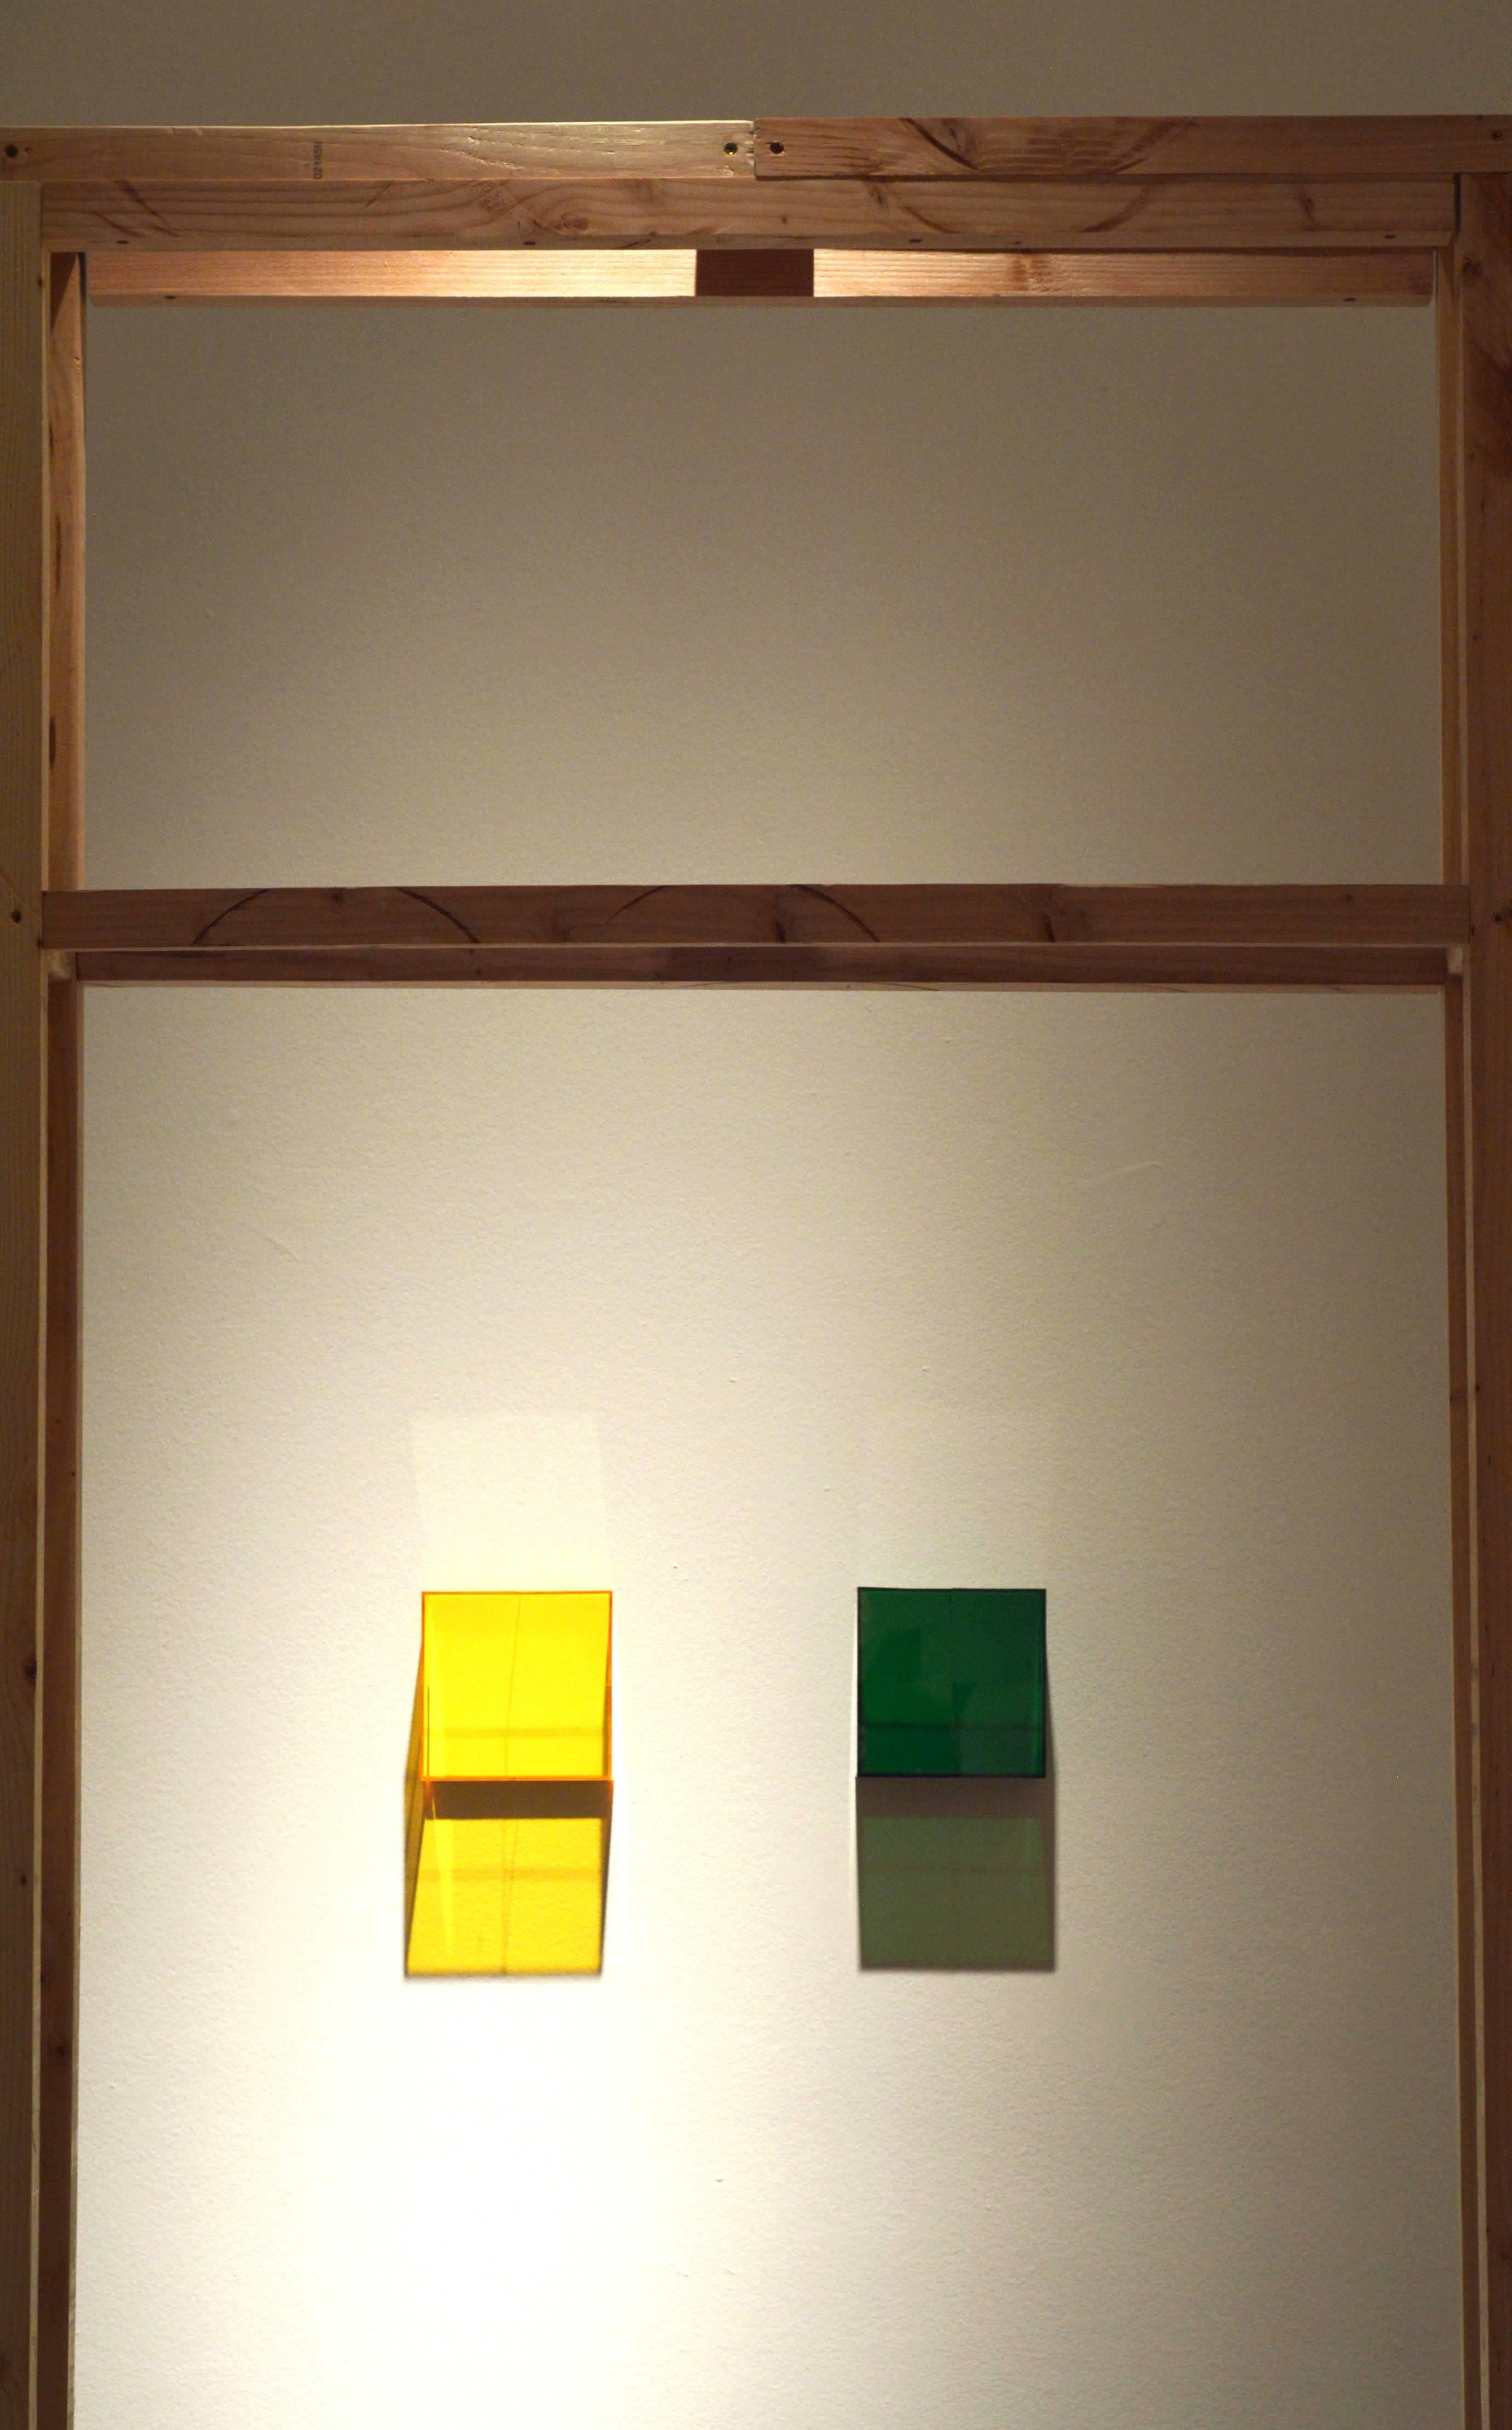 G-Green, T-Yellow, C-Red and A-Blue - Beige Abstract Sculpture by Alejandro Valencia